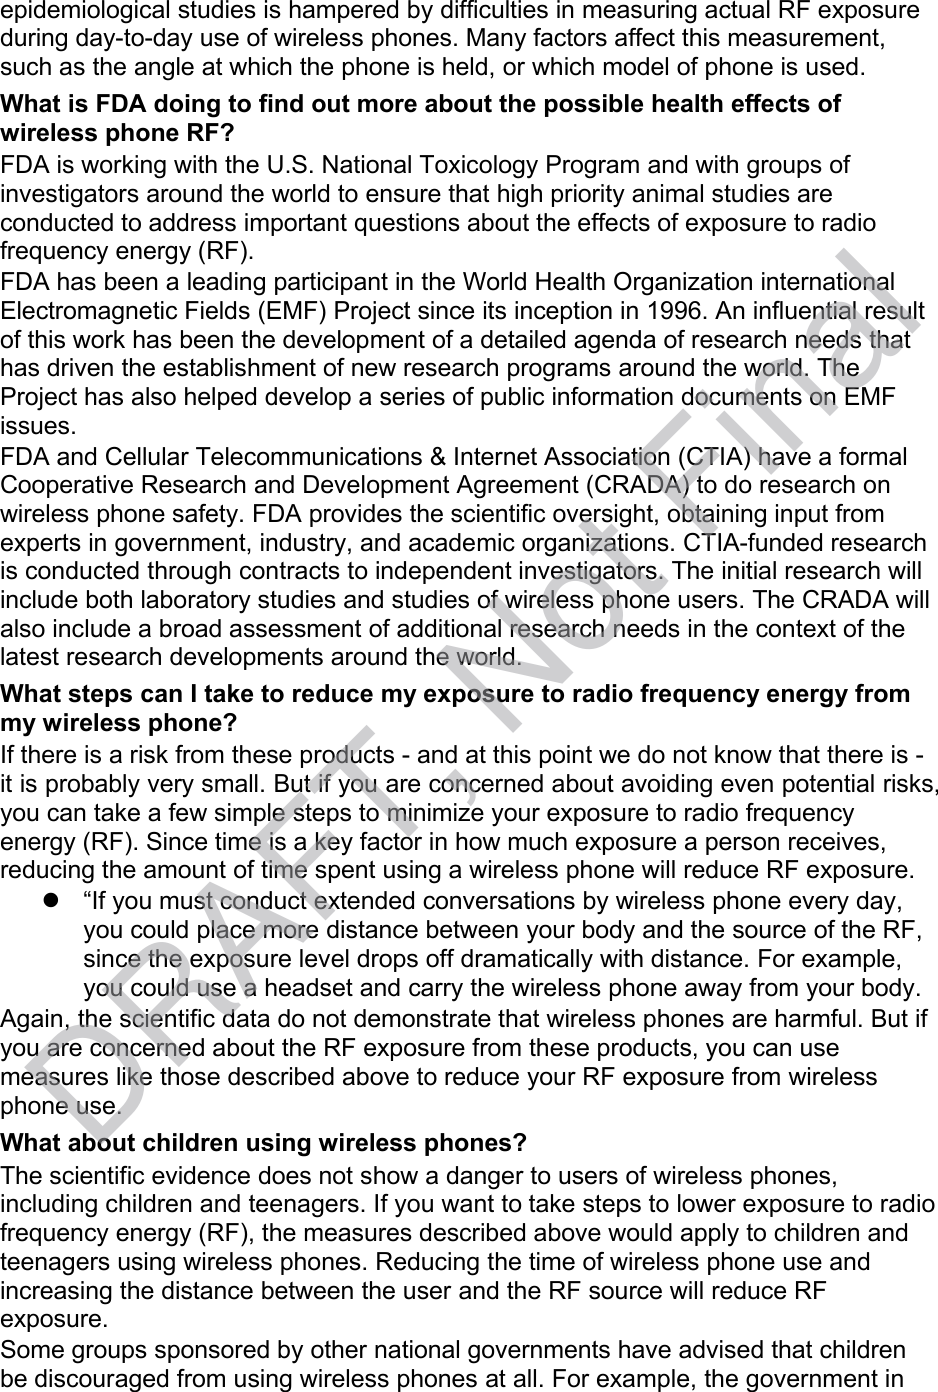 epidemiological studies is hampered by difficulties in measuring actual RF exposure during day-to-day use of wireless phones. Many factors affect this measurement, such as the angle at which the phone is held, or which model of phone is used. What is FDA doing to find out more about the possible health effects of wireless phone RF? FDA is working with the U.S. National Toxicology Program and with groups of investigators around the world to ensure that high priority animal studies are conducted to address important questions about the effects of exposure to radio frequency energy (RF). FDA has been a leading participant in the World Health Organization international Electromagnetic Fields (EMF) Project since its inception in 1996. An influential result of this work has been the development of a detailed agenda of research needs that has driven the establishment of new research programs around the world. The Project has also helped develop a series of public information documents on EMF issues. FDA and Cellular Telecommunications &amp; Internet Association (CTIA) have a formal Cooperative Research and Development Agreement (CRADA) to do research on wireless phone safety. FDA provides the scientific oversight, obtaining input from experts in government, industry, and academic organizations. CTIA-funded research is conducted through contracts to independent investigators. The initial research will include both laboratory studies and studies of wireless phone users. The CRADA will also include a broad assessment of additional research needs in the context of the latest research developments around the world. What steps can I take to reduce my exposure to radio frequency energy from my wireless phone? If there is a risk from these products - and at this point we do not know that there is -  it is probably very small. But if you are concerned about avoiding even potential risks, you can take a few simple steps to minimize your exposure to radio frequency energy (RF). Since time is a key factor in how much exposure a person receives, reducing the amount of time spent using a wireless phone will reduce RF exposure.   “If you must conduct extended conversations by wireless phone every day, you could place more distance between your body and the source of the RF, since the exposure level drops off dramatically with distance. For example, you could use a headset and carry the wireless phone away from your body. Again, the scientific data do not demonstrate that wireless phones are harmful. But if you are concerned about the RF exposure from these products, you can use measures like those described above to reduce your RF exposure from wireless phone use. What about children using wireless phones? The scientific evidence does not show a danger to users of wireless phones, including children and teenagers. If you want to take steps to lower exposure to radio frequency energy (RF), the measures described above would apply to children and teenagers using wireless phones. Reducing the time of wireless phone use and increasing the distance between the user and the RF source will reduce RF exposure. Some groups sponsored by other national governments have advised that children be discouraged from using wireless phones at all. For example, the government in DRAFT, Not Final